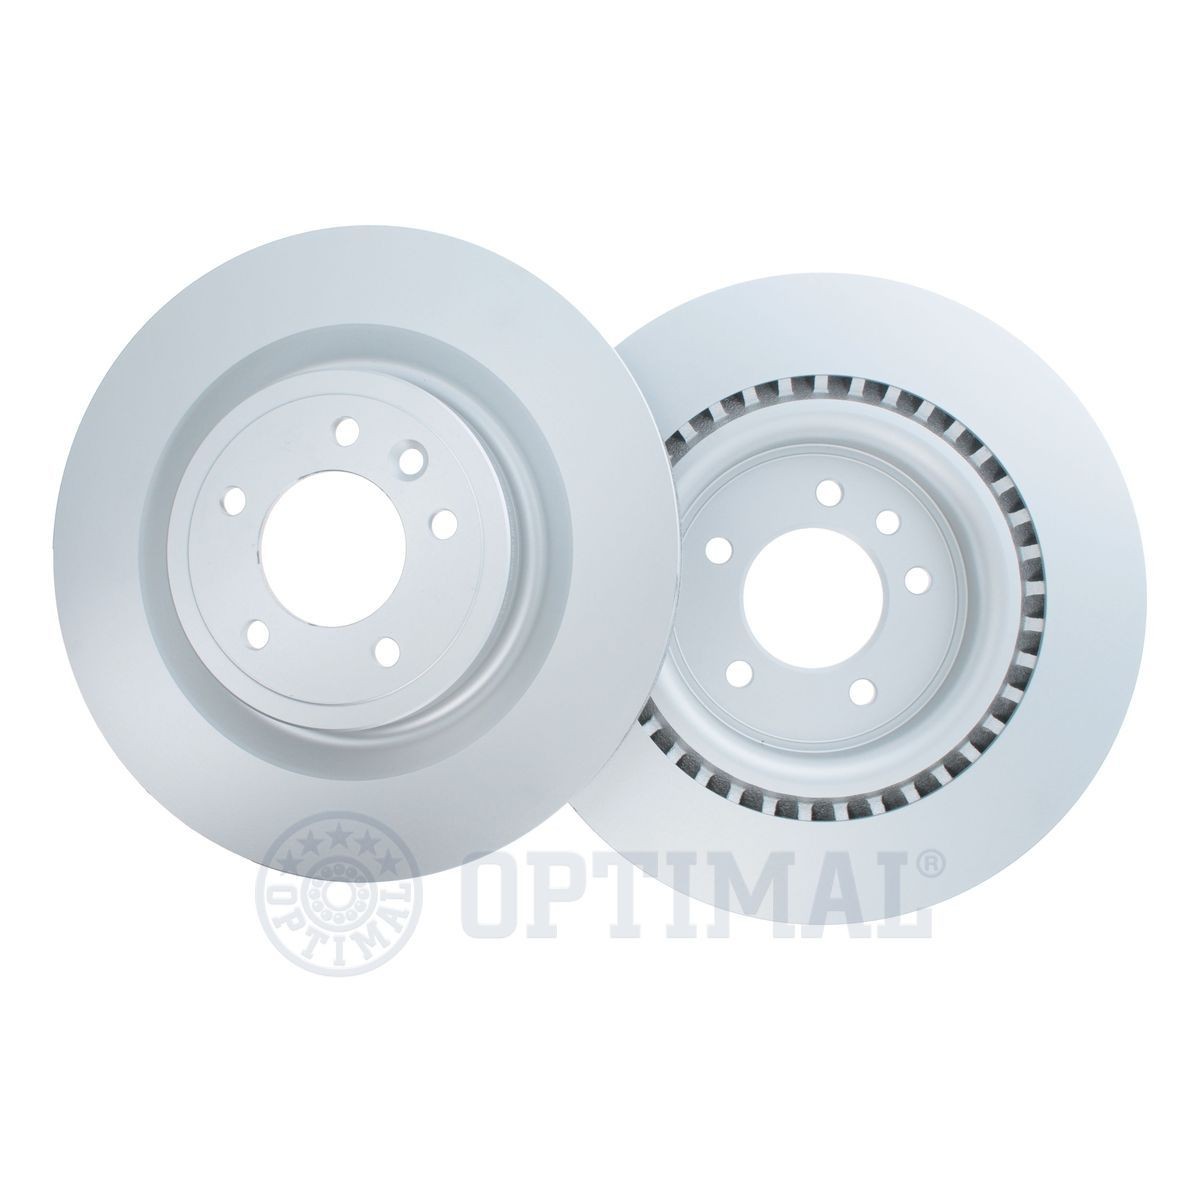 BS-9818HC OPTIMAL Brake rotors LAND ROVER Rear Axle, 350x25mm, 5/6, internally vented, Coated, High-carbon